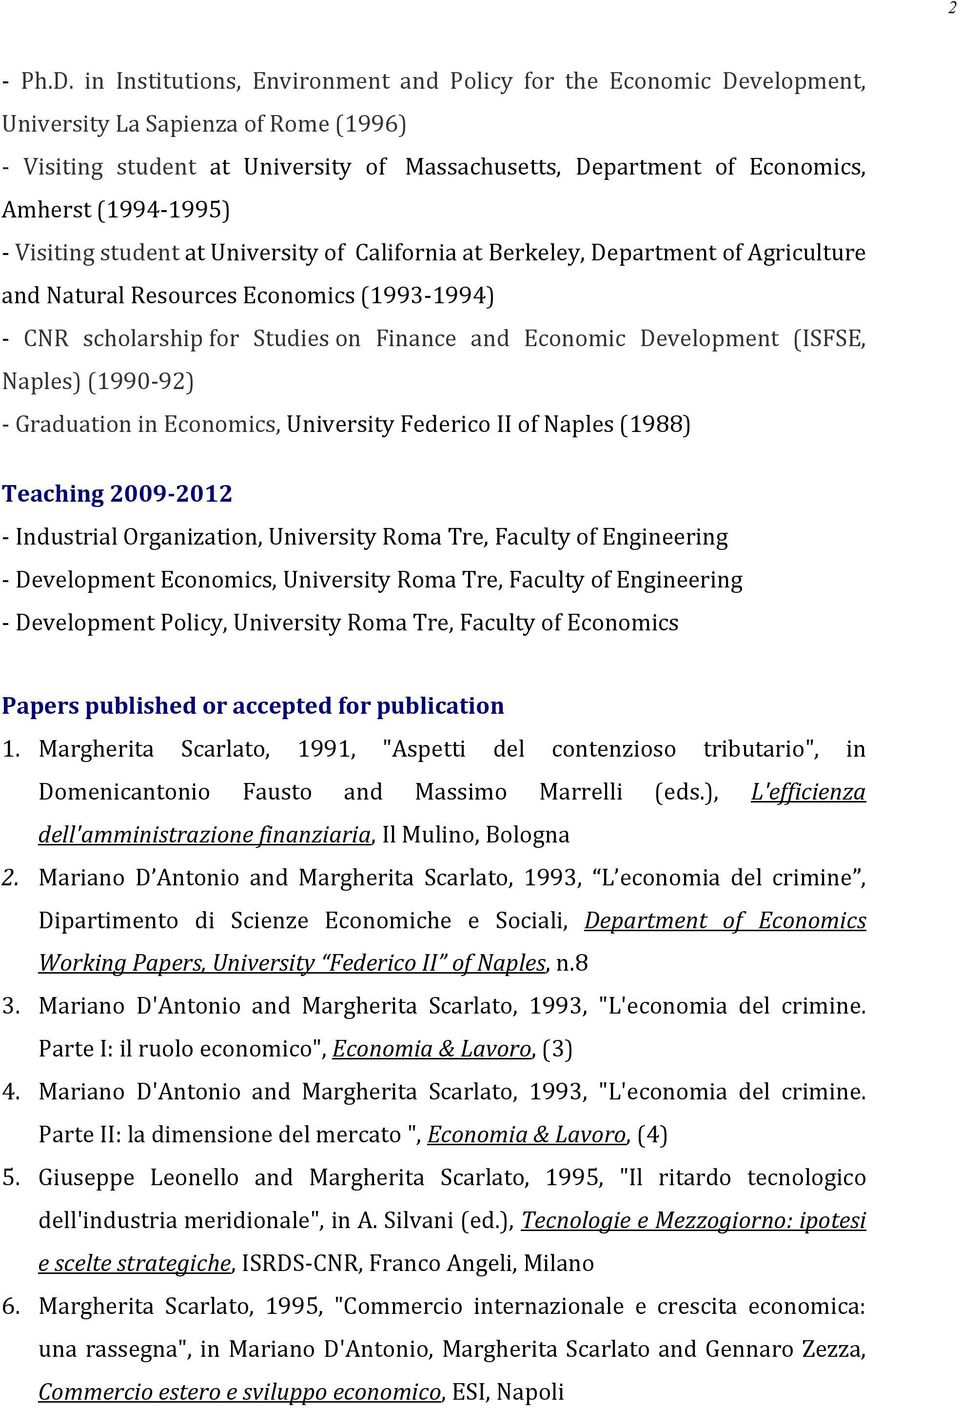 (1994-1995) - Visiting student at University of California at Berkeley, Department of Agriculture and Natural Resources Economics (1993-1994) - CNR scholarship for Studies on Finance and Economic